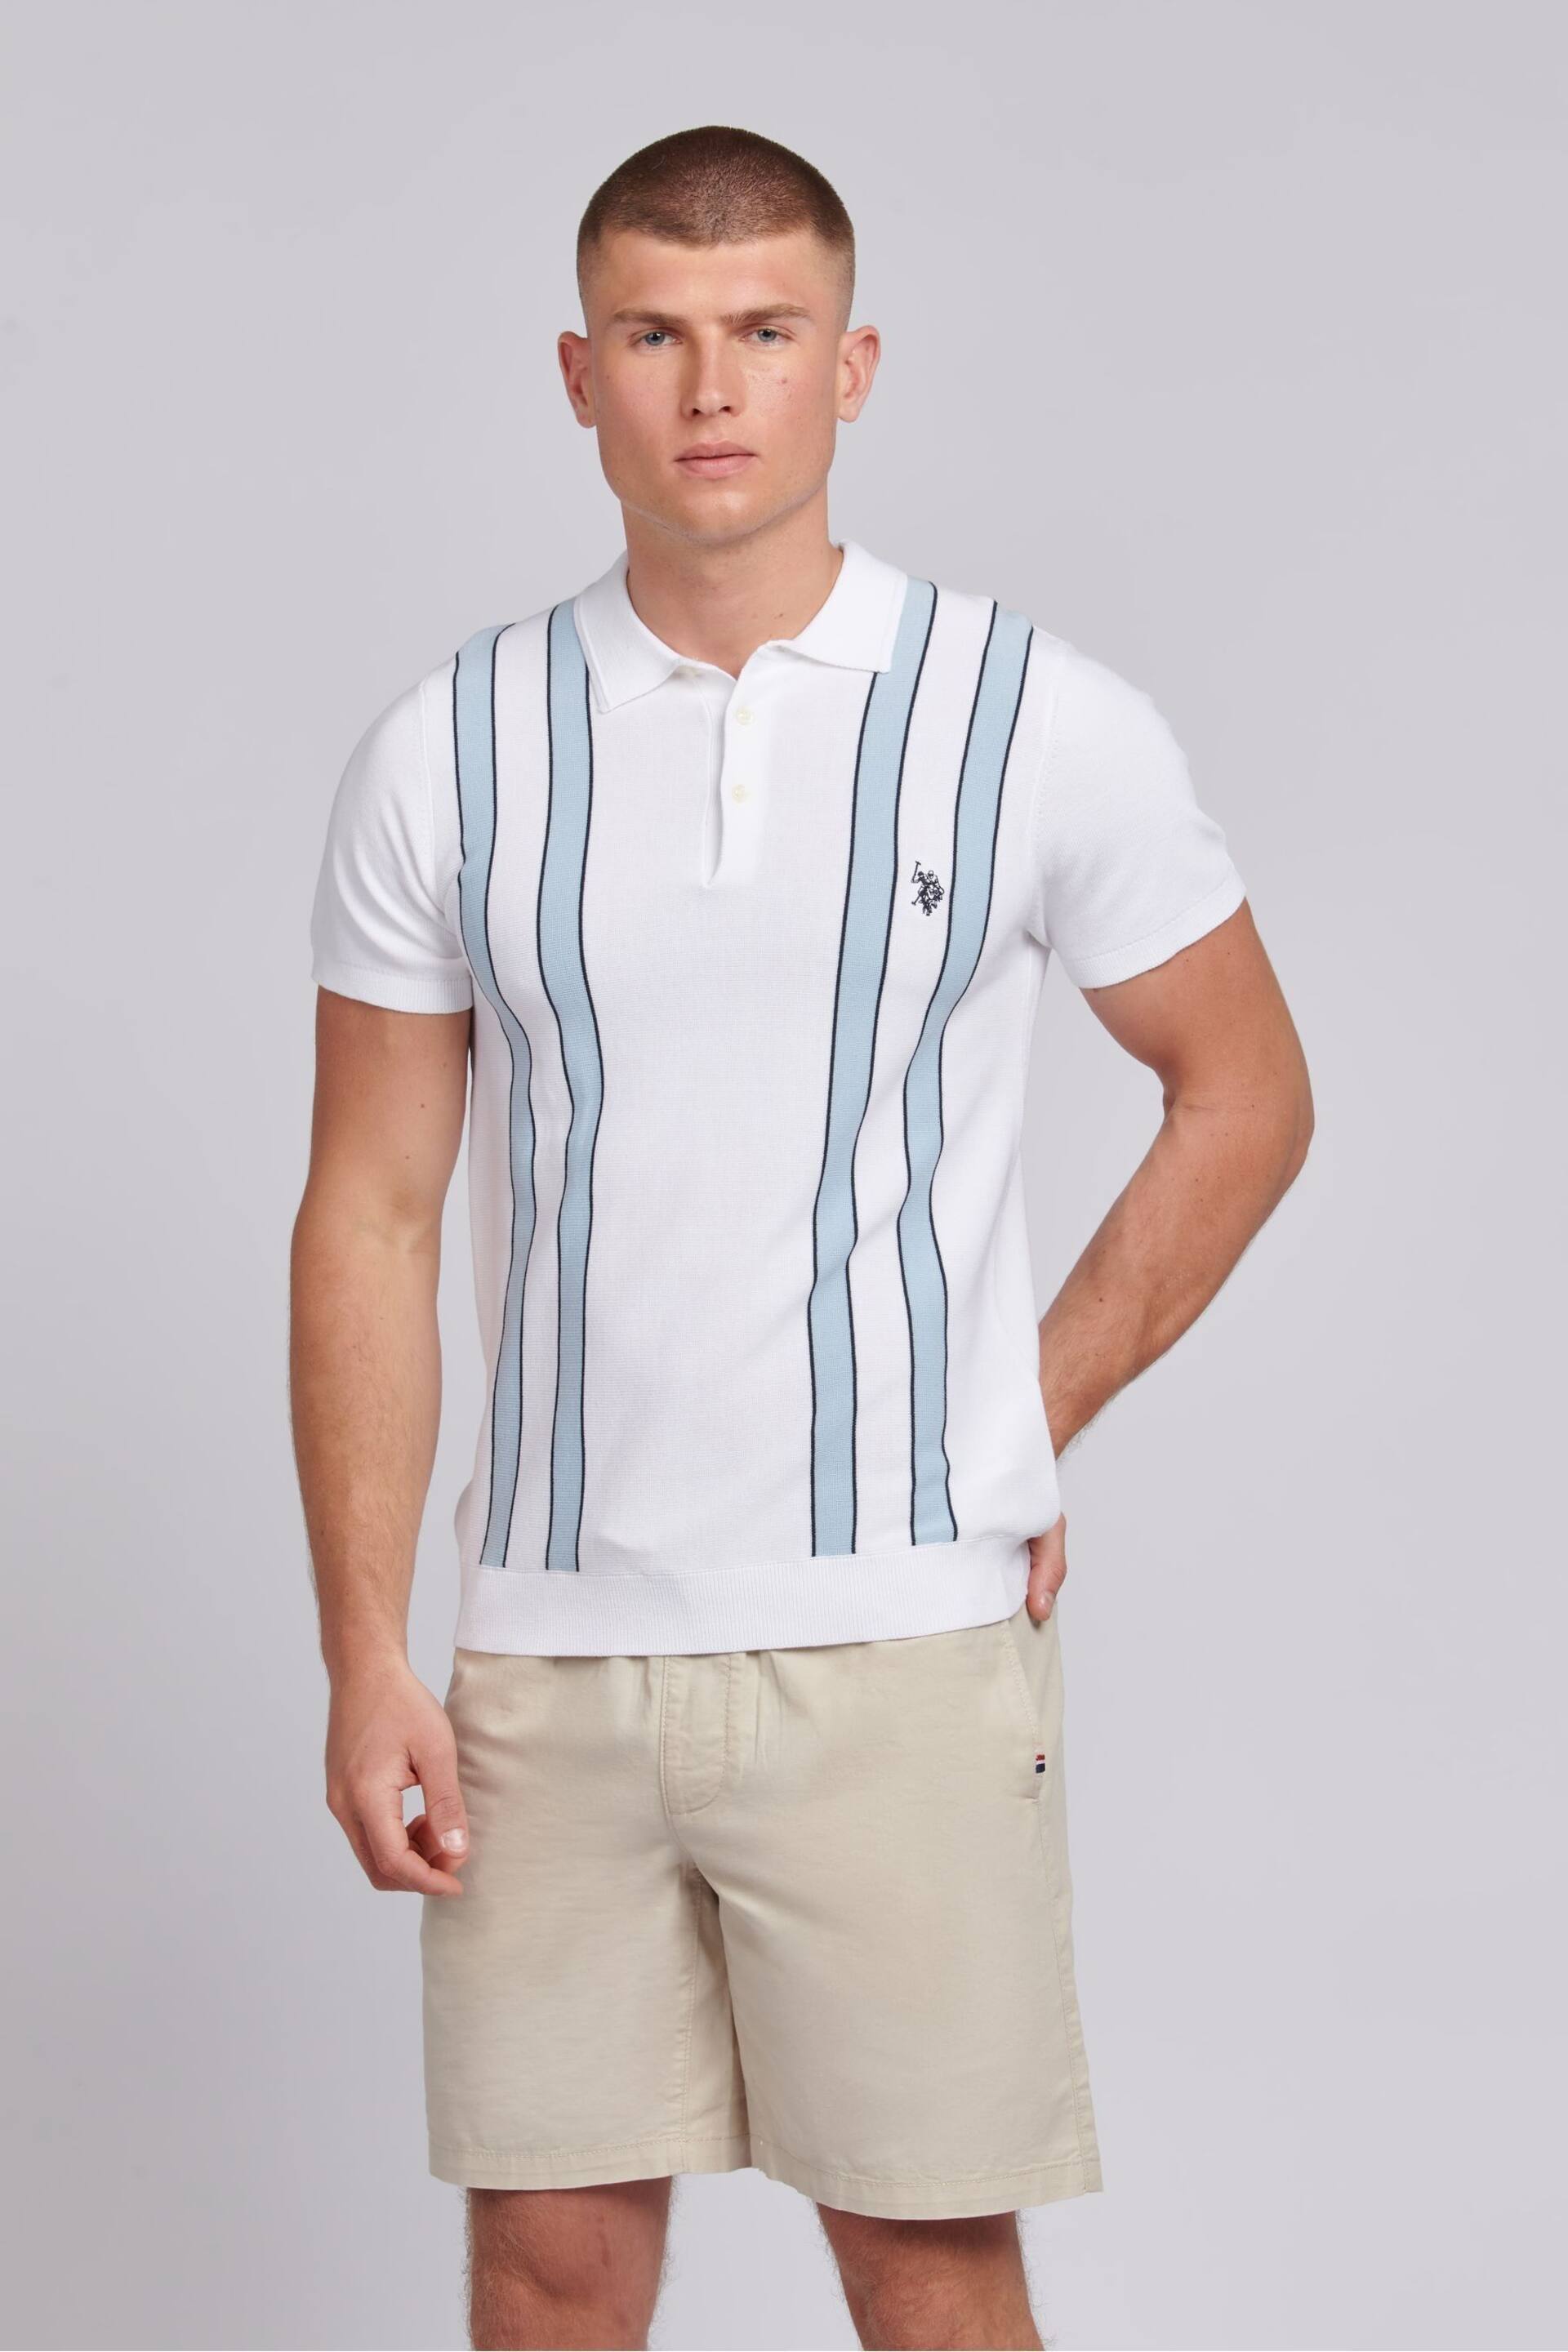 U.S. Polo Assn. Mens Regular Fit Vertical Stripe Knit White Polo Shirt - Image 1 of 7